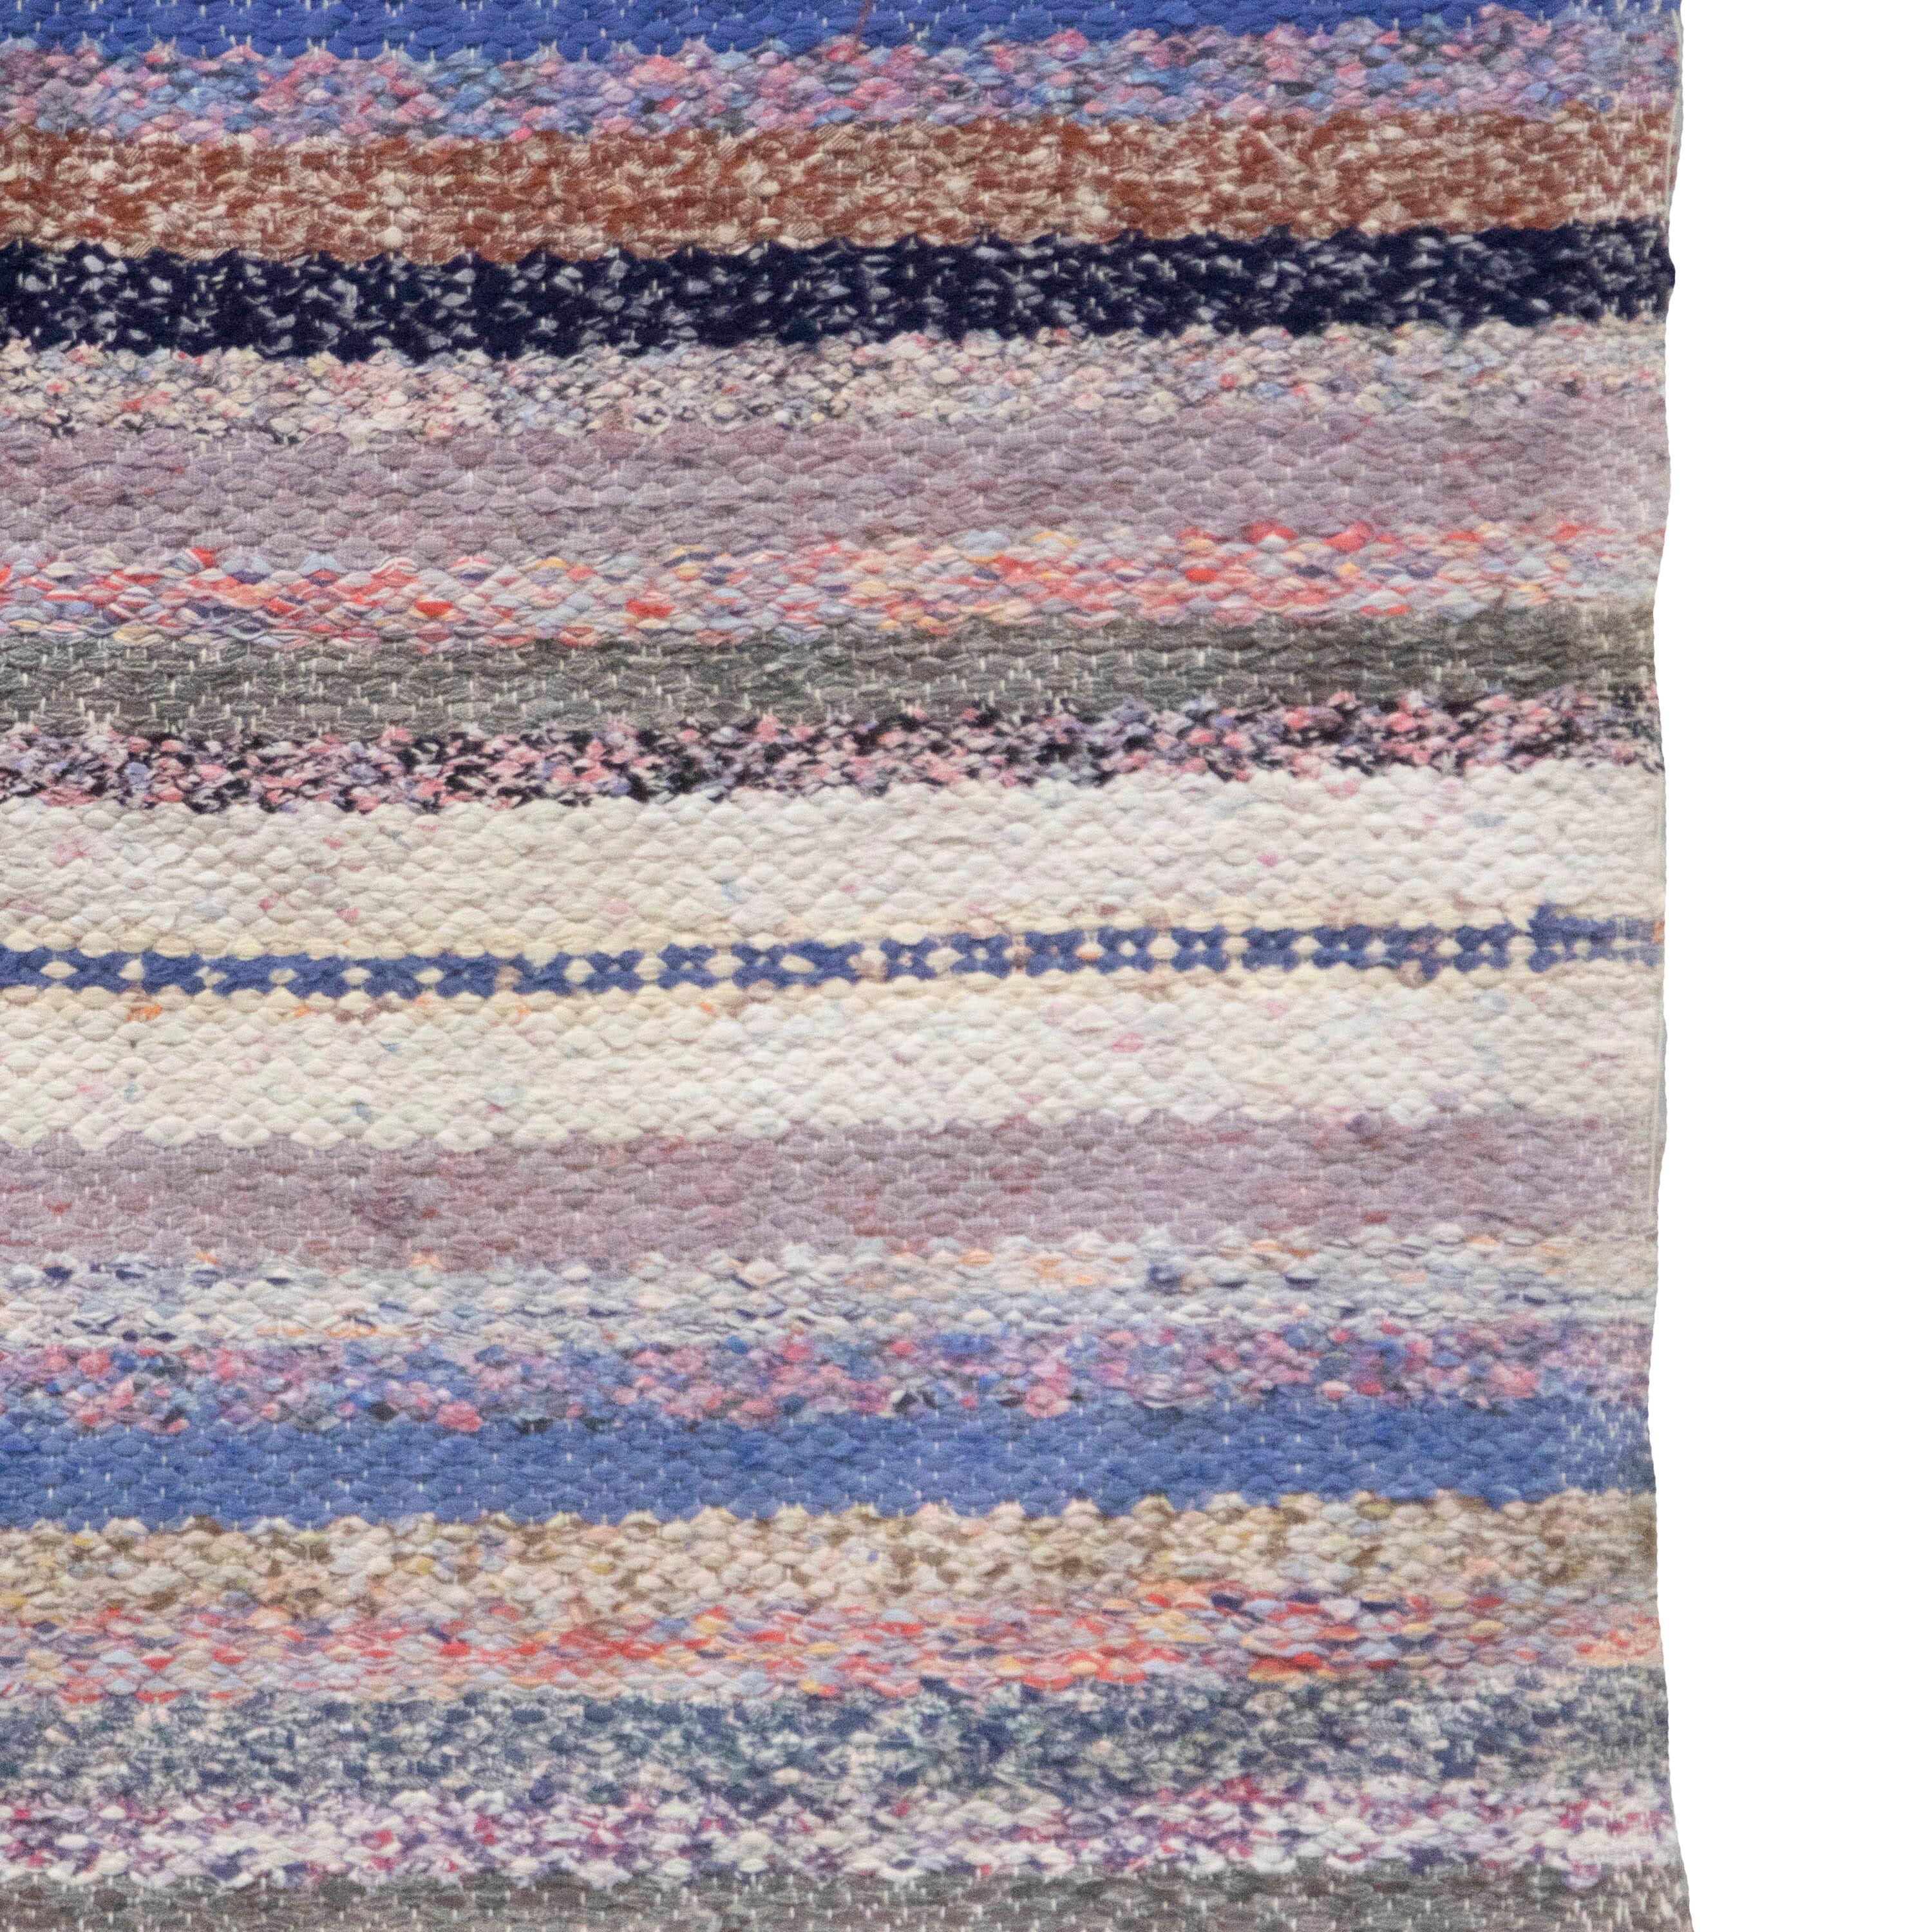 20th Century Swedish rag rug. Featuring a stripe design in tones of blue, black, brown, red, and grey. This rug is machine washable at 30 degrees.
RT6024598